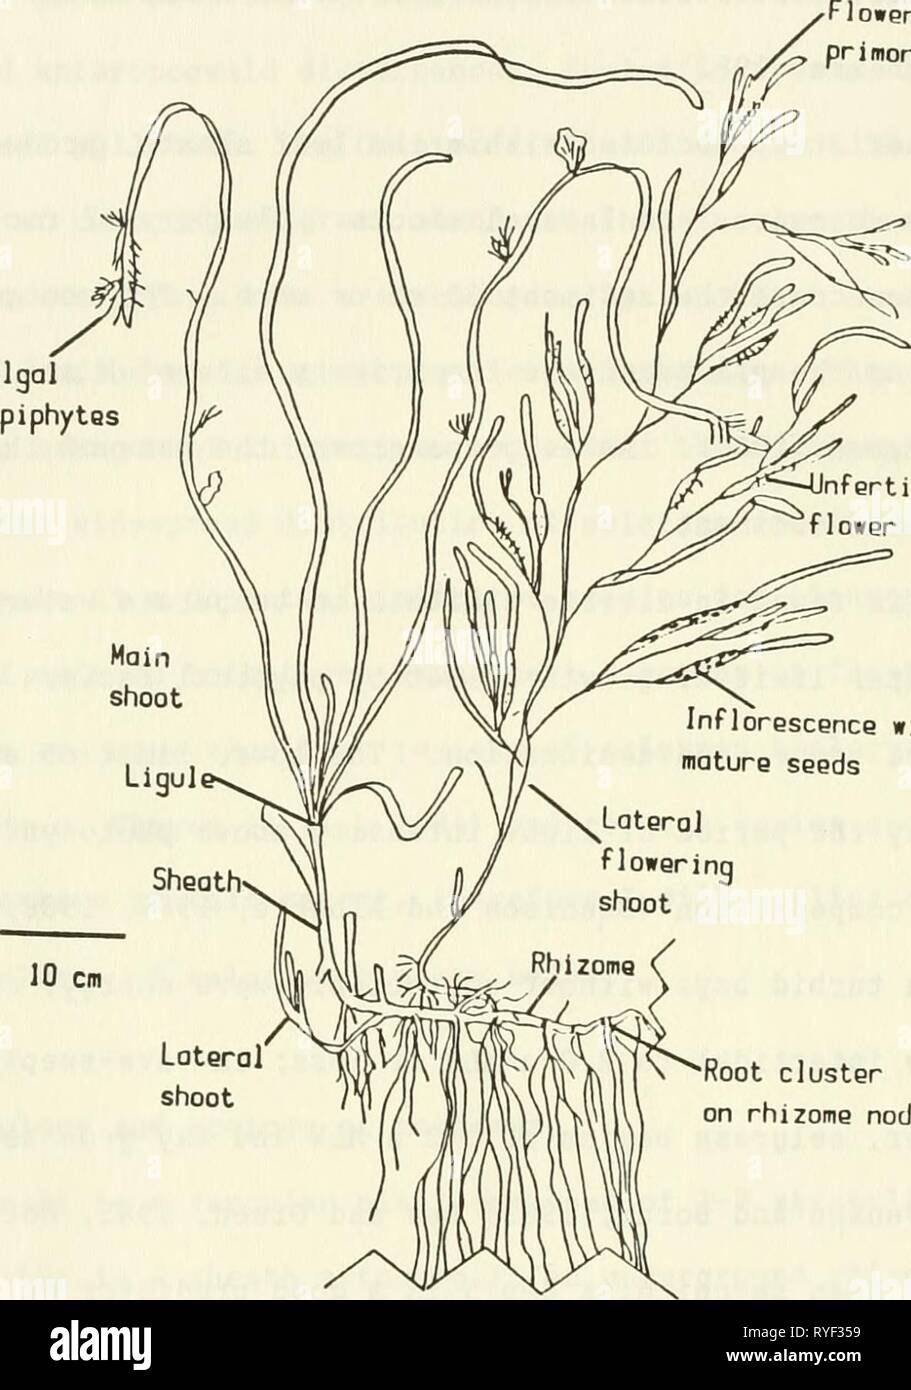 Eelgrass in Buzzards Bay : distributation, production, and historical changes in abundance  eelgrassinbuzzar00cost Year: 1988  primordio Algal epiphytes Infertilized flower    ntlorescence with mature seeds Root cluster on rhizome node Figure 1. General morphology of Zostera marina. Eelgrass leaves are bound together in a sheath attached to an underground rhizome with clusters of roots on each rhizome node. Lateral vegetative or reproductive shoots may originate from within the sheath of the main shoot. The inflorescence on the lateral reproductive shoot contains both male and female flowers.  Stock Photo